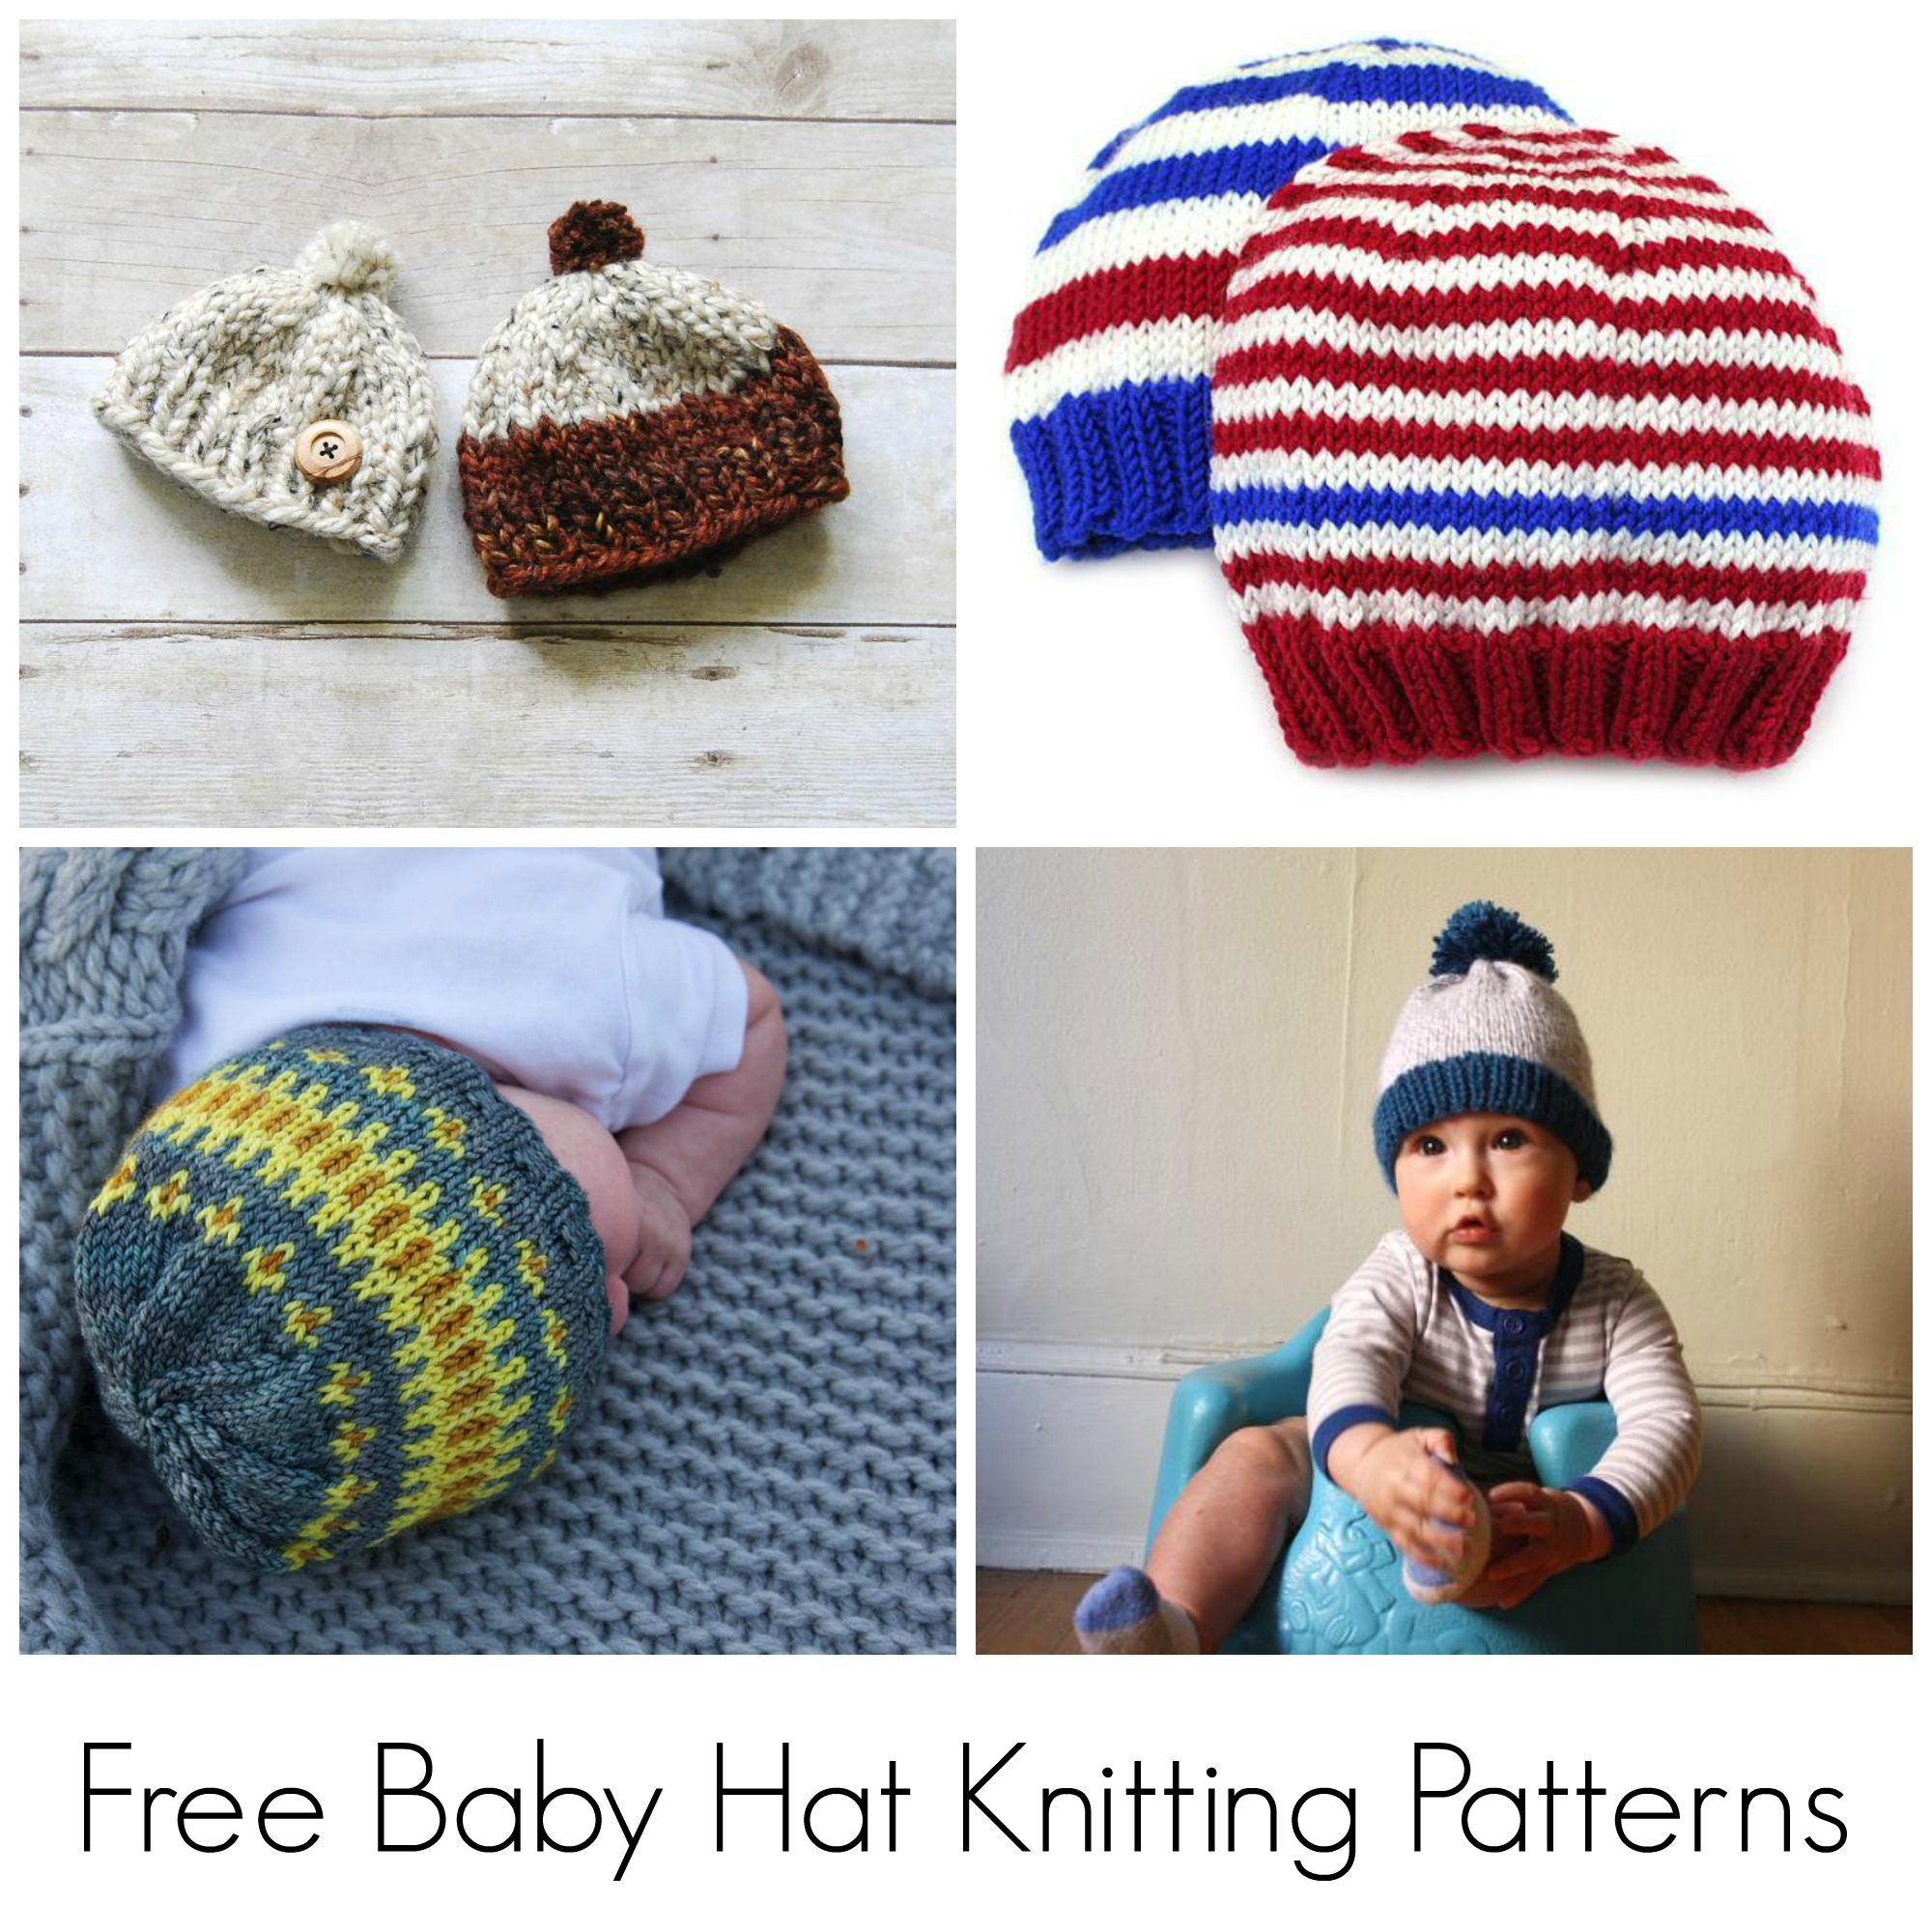 Free Knitting Patterns For Babies Hats 10 Free Knitting Patterns For Ba Hats On Craftsy